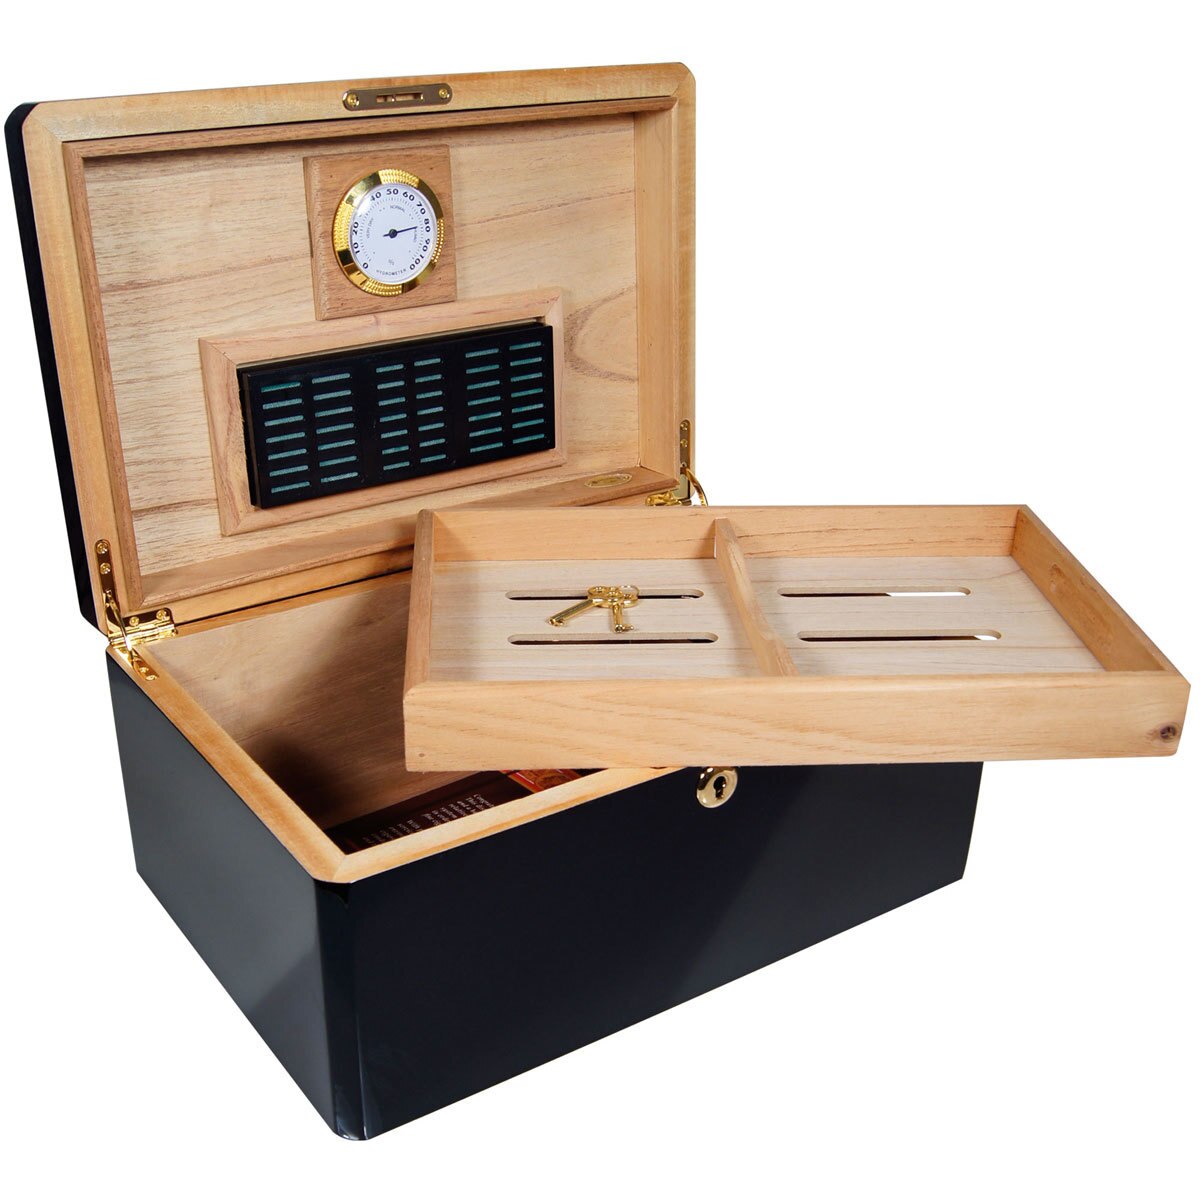 Cuban Crafters Colores Negro Humidor for 100 Cigars